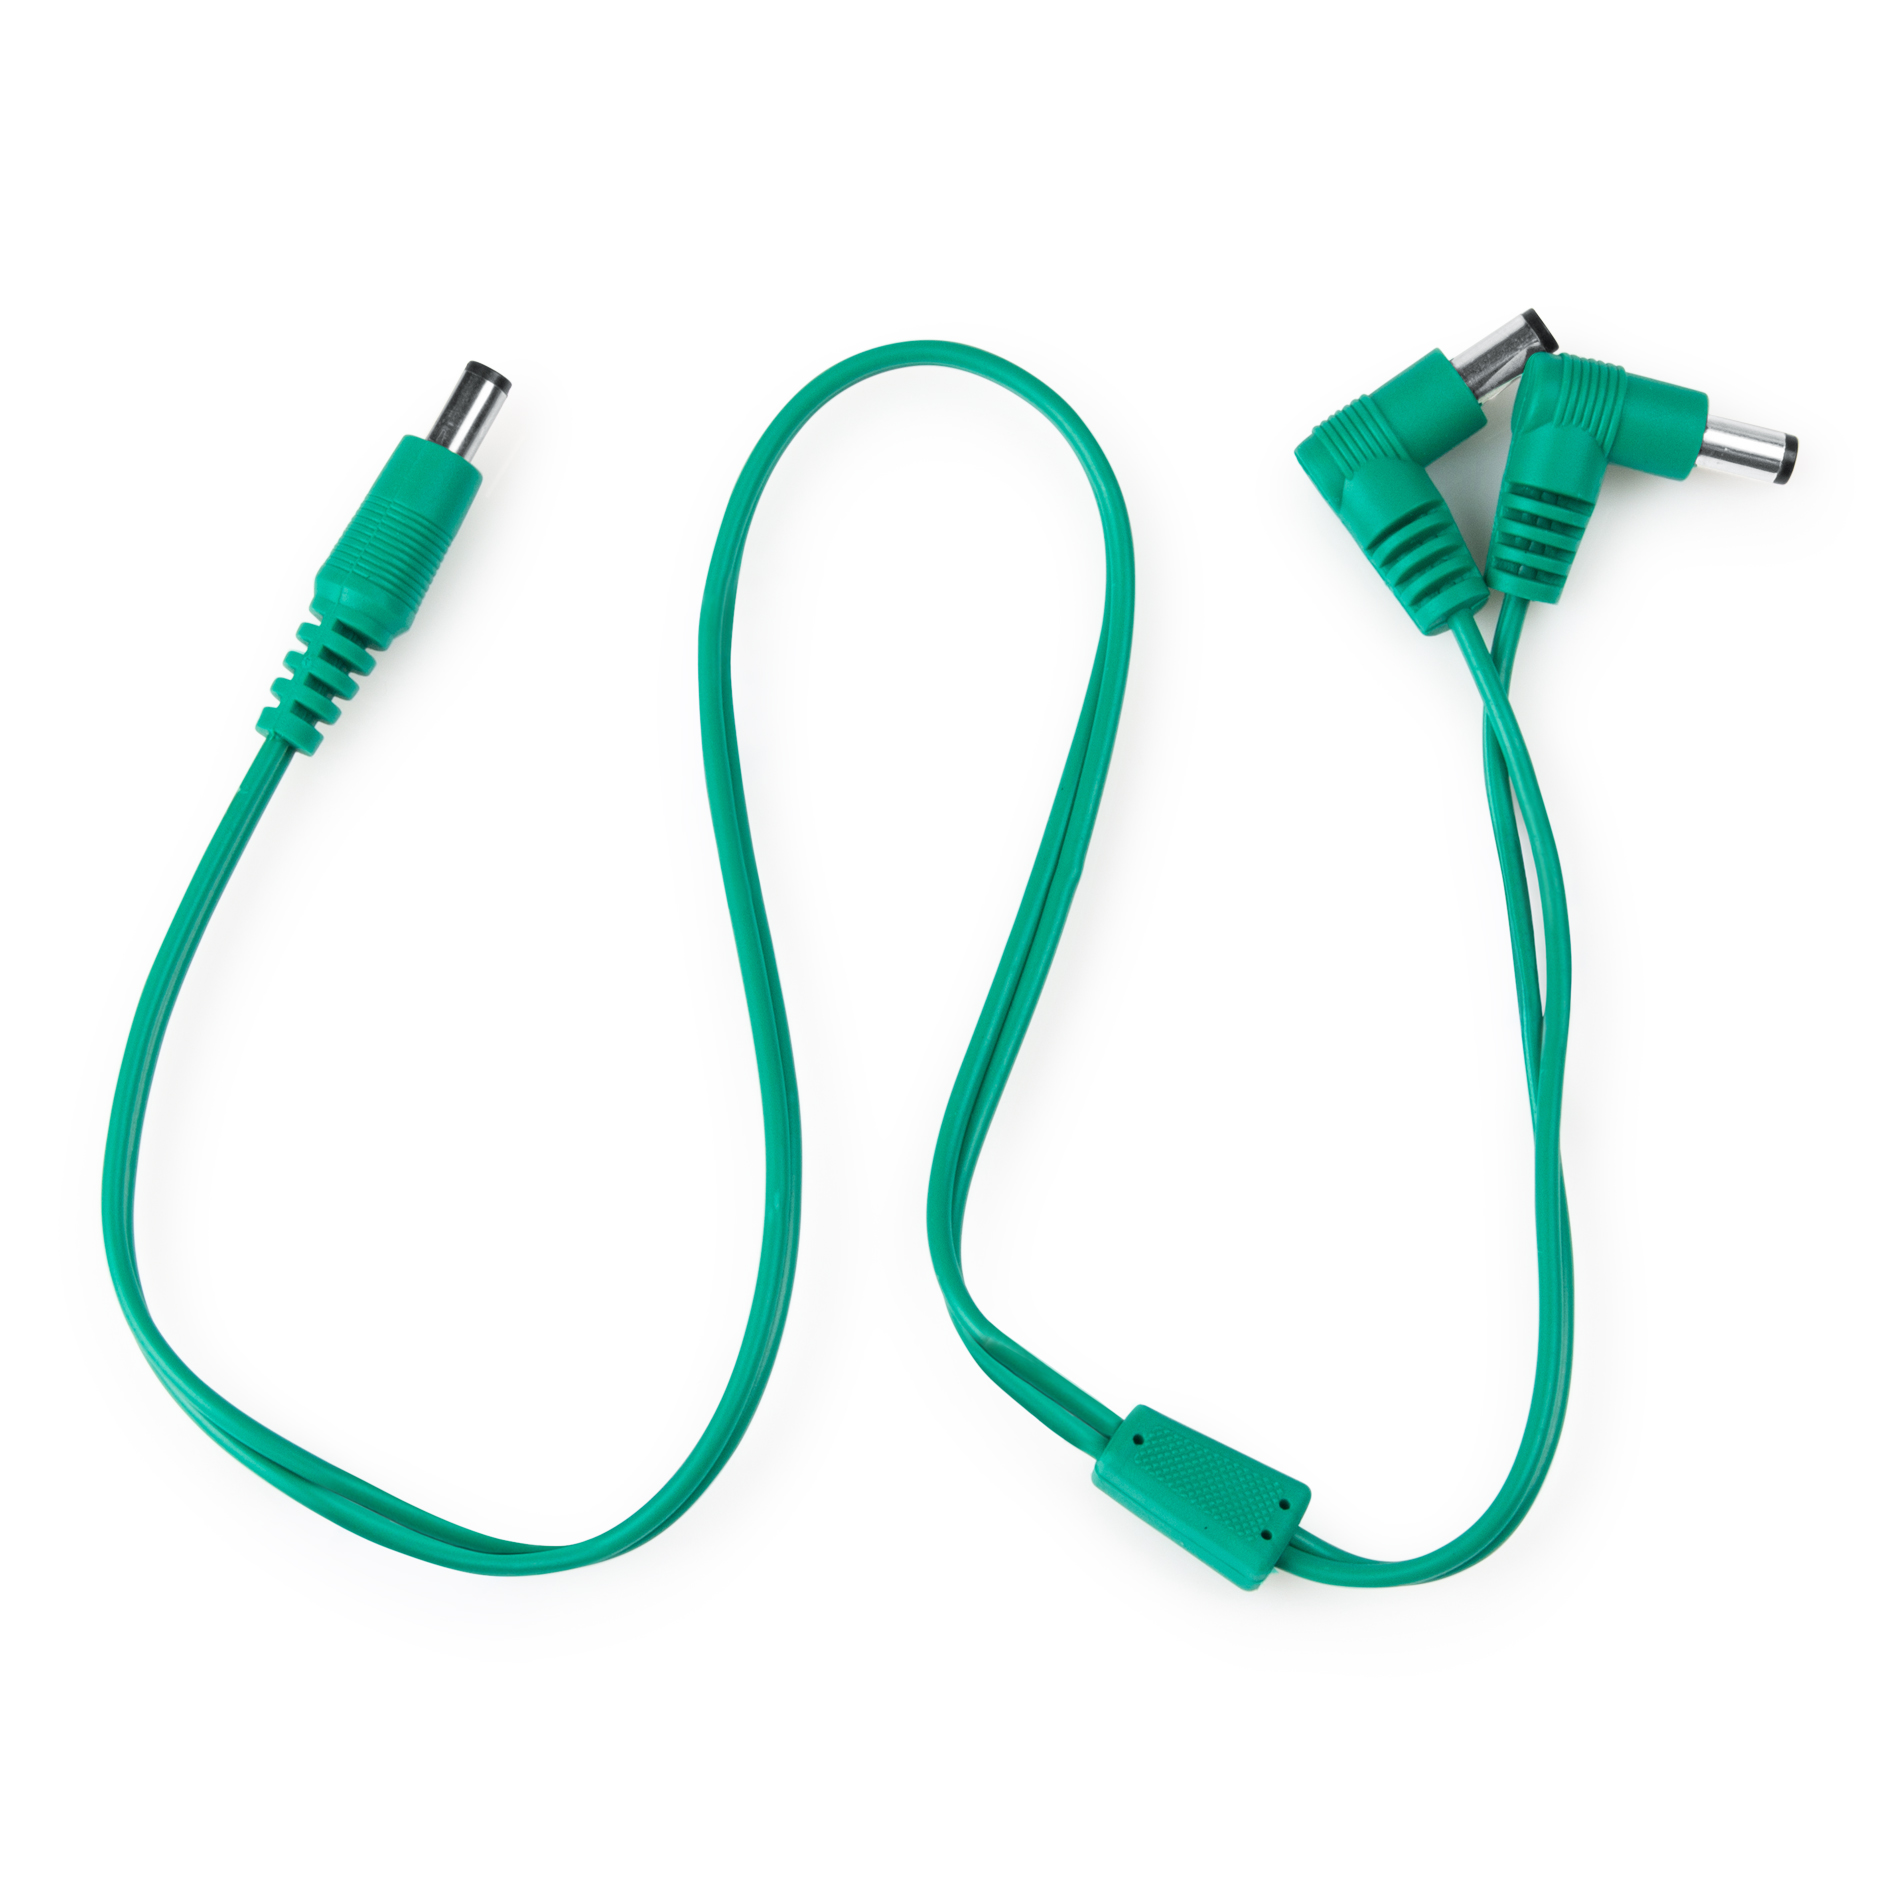 Current Doubler Cable For Line 6 Pedals-GTR-PWR-2XCURR-L6